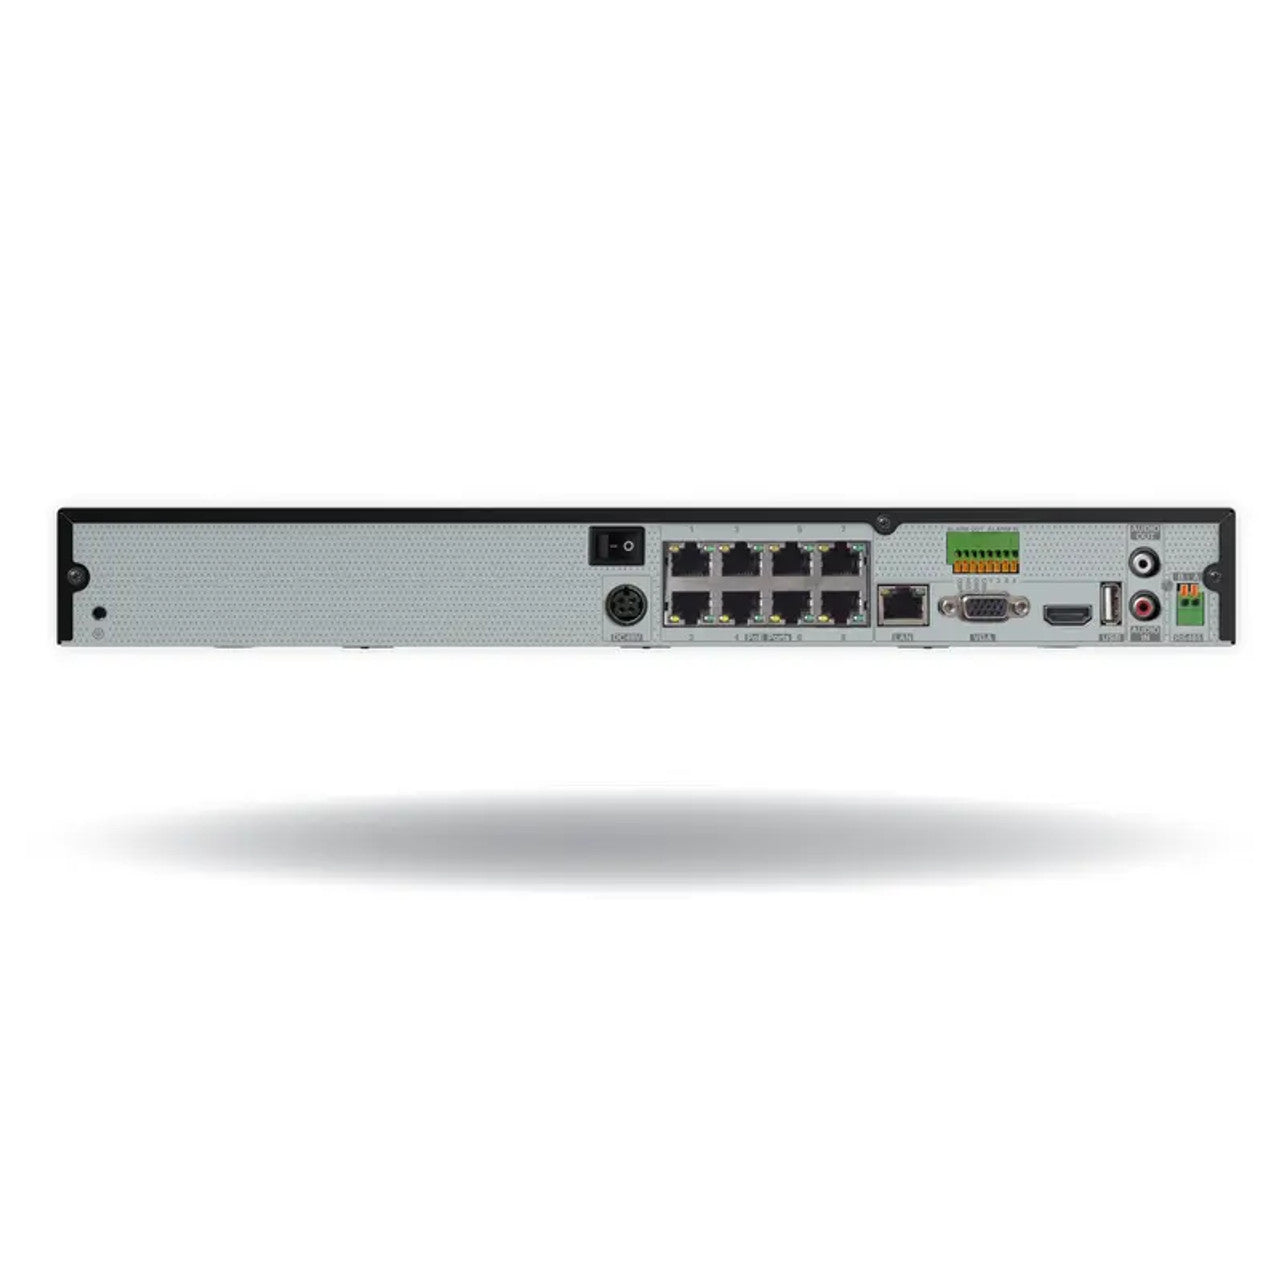 Digital Watchdog DW-VG41216T8P VMAX IP G4 8 Channel PoE NVR with 4 bonus channels with 16TB Hard Drive, 12-Channel